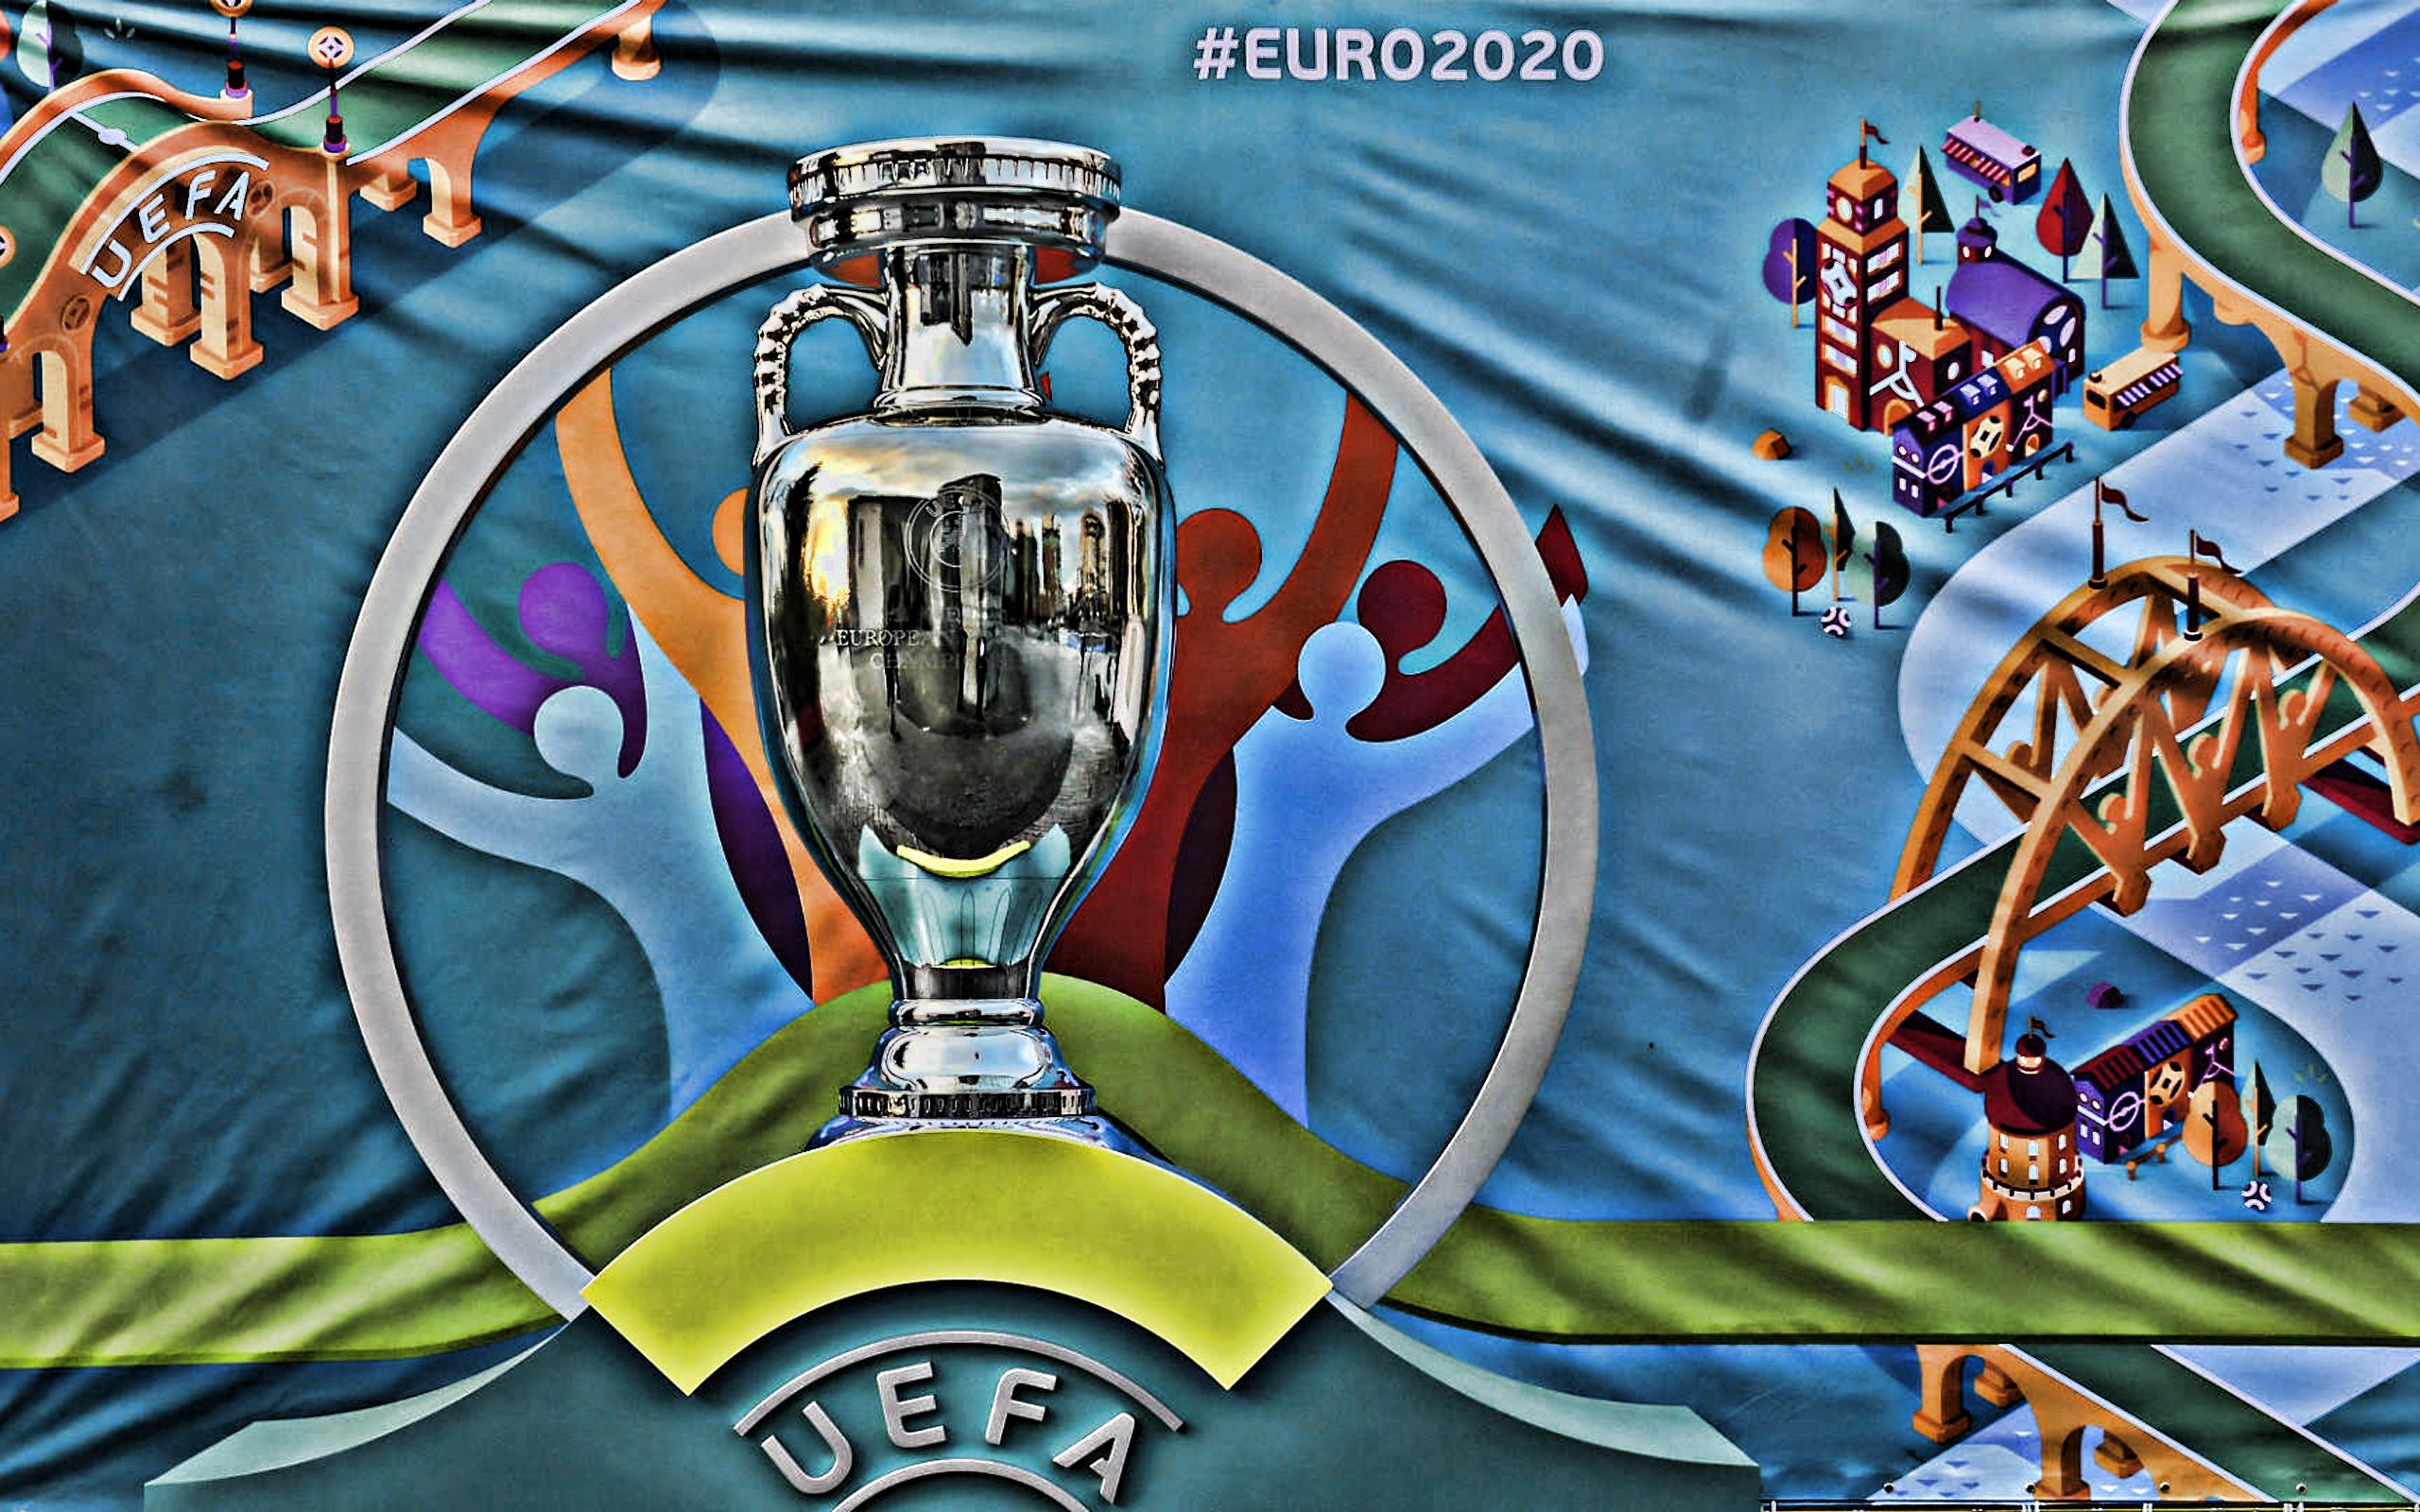 Download wallpaper UEFA Euro award, silver cup, Euro football tournament, Europe, 2020 UEFA European Football Championship for desktop with resolution 2560x1600. High Quality HD picture wallpaper